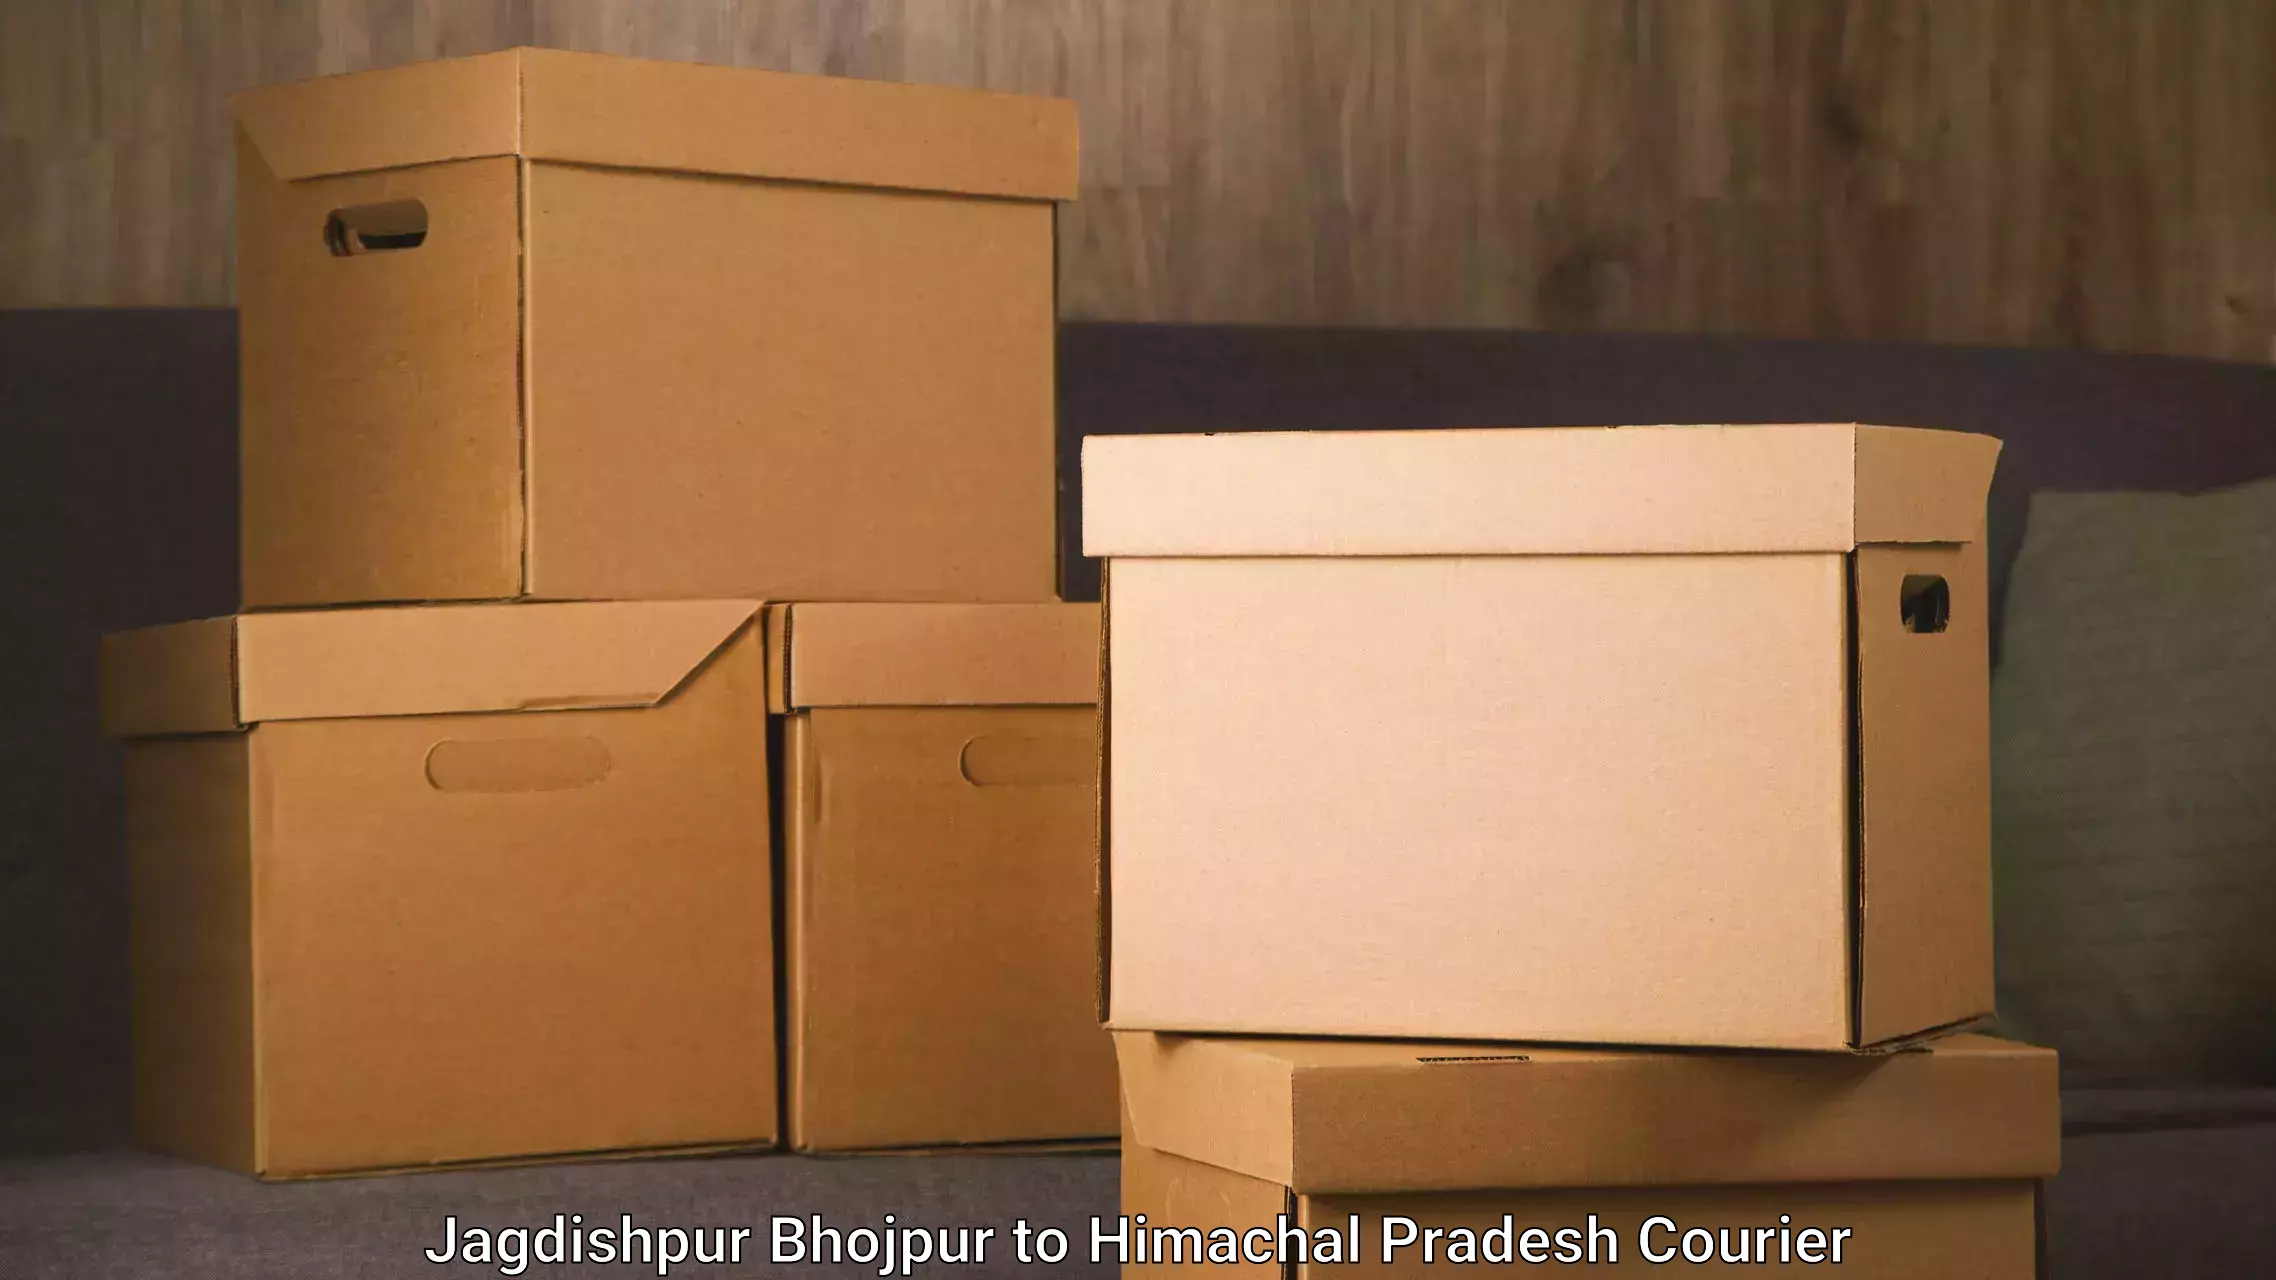 Trusted relocation experts Jagdishpur Bhojpur to Jeori